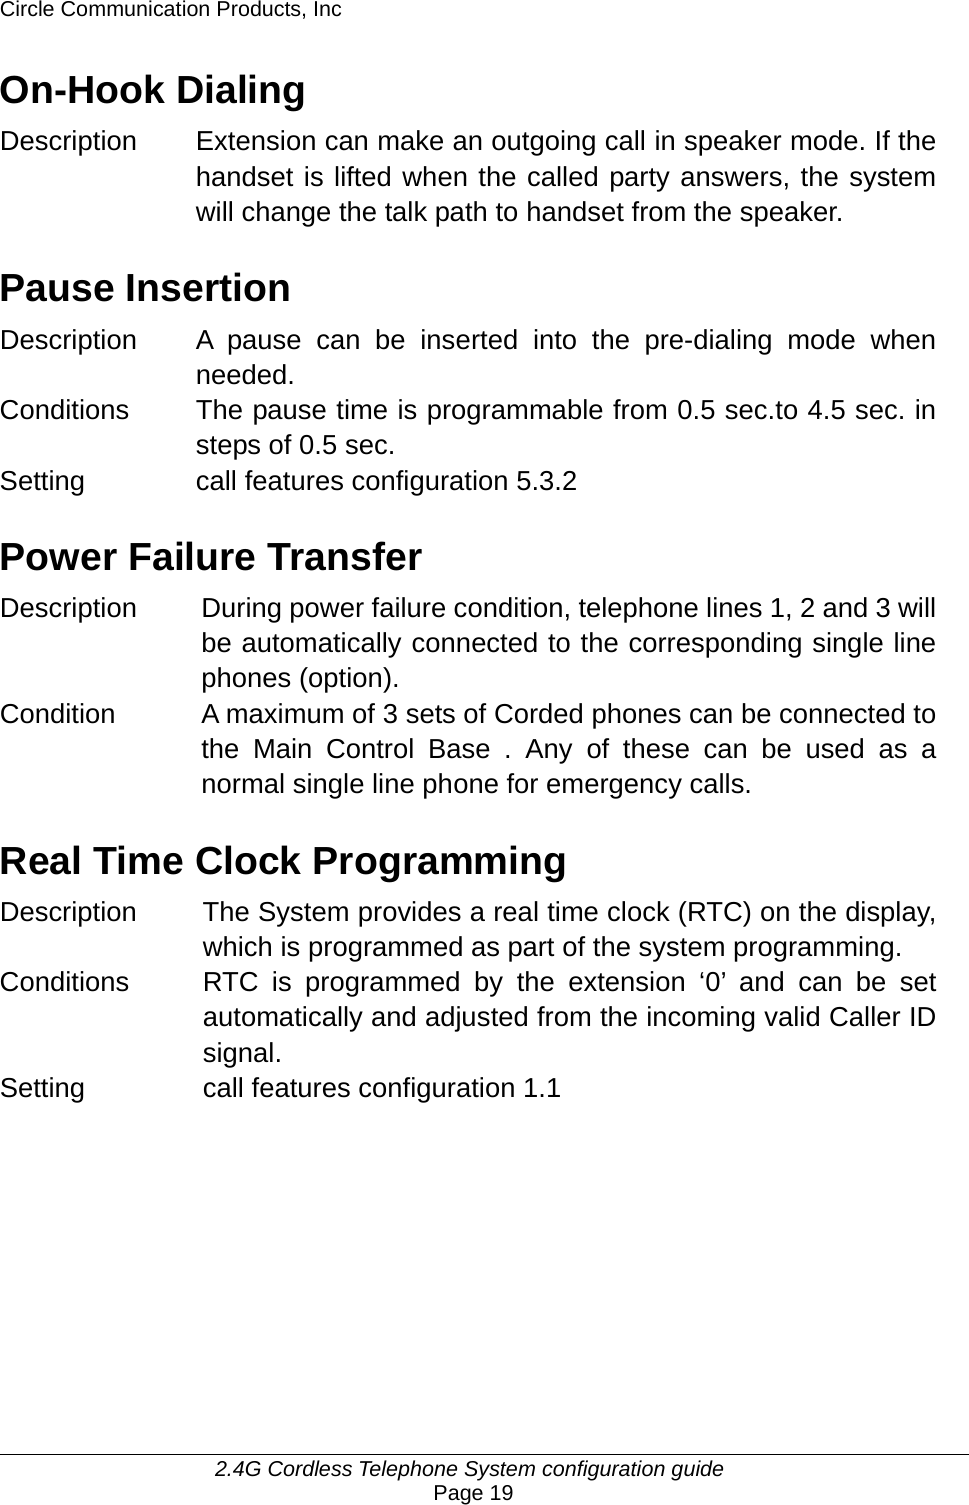 Circle Communication Products, Inc     2.4G Cordless Telephone System configuration guide Page 19 On-Hook Dialing Description Extension can make an outgoing call in speaker mode. If the handset is lifted when the called party answers, the system will change the talk path to handset from the speaker.  Pause Insertion Description  A pause can be inserted into the pre-dialing mode when needed. Conditions  The pause time is programmable from 0.5 sec.to 4.5 sec. in steps of 0.5 sec. Setting   call features configuration 5.3.2  Power Failure Transfer Description During power failure condition, telephone lines 1, 2 and 3 will be automatically connected to the corresponding single line phones (option). Condition  A maximum of 3 sets of Corded phones can be connected to the Main Control Base . Any of these can be used as a normal single line phone for emergency calls.  Real Time Clock Programming Description  The System provides a real time clock (RTC) on the display, which is programmed as part of the system programming. Conditions  RTC is programmed by the extension ‘0’ and can be set automatically and adjusted from the incoming valid Caller ID signal. Setting  call features configuration 1.1        